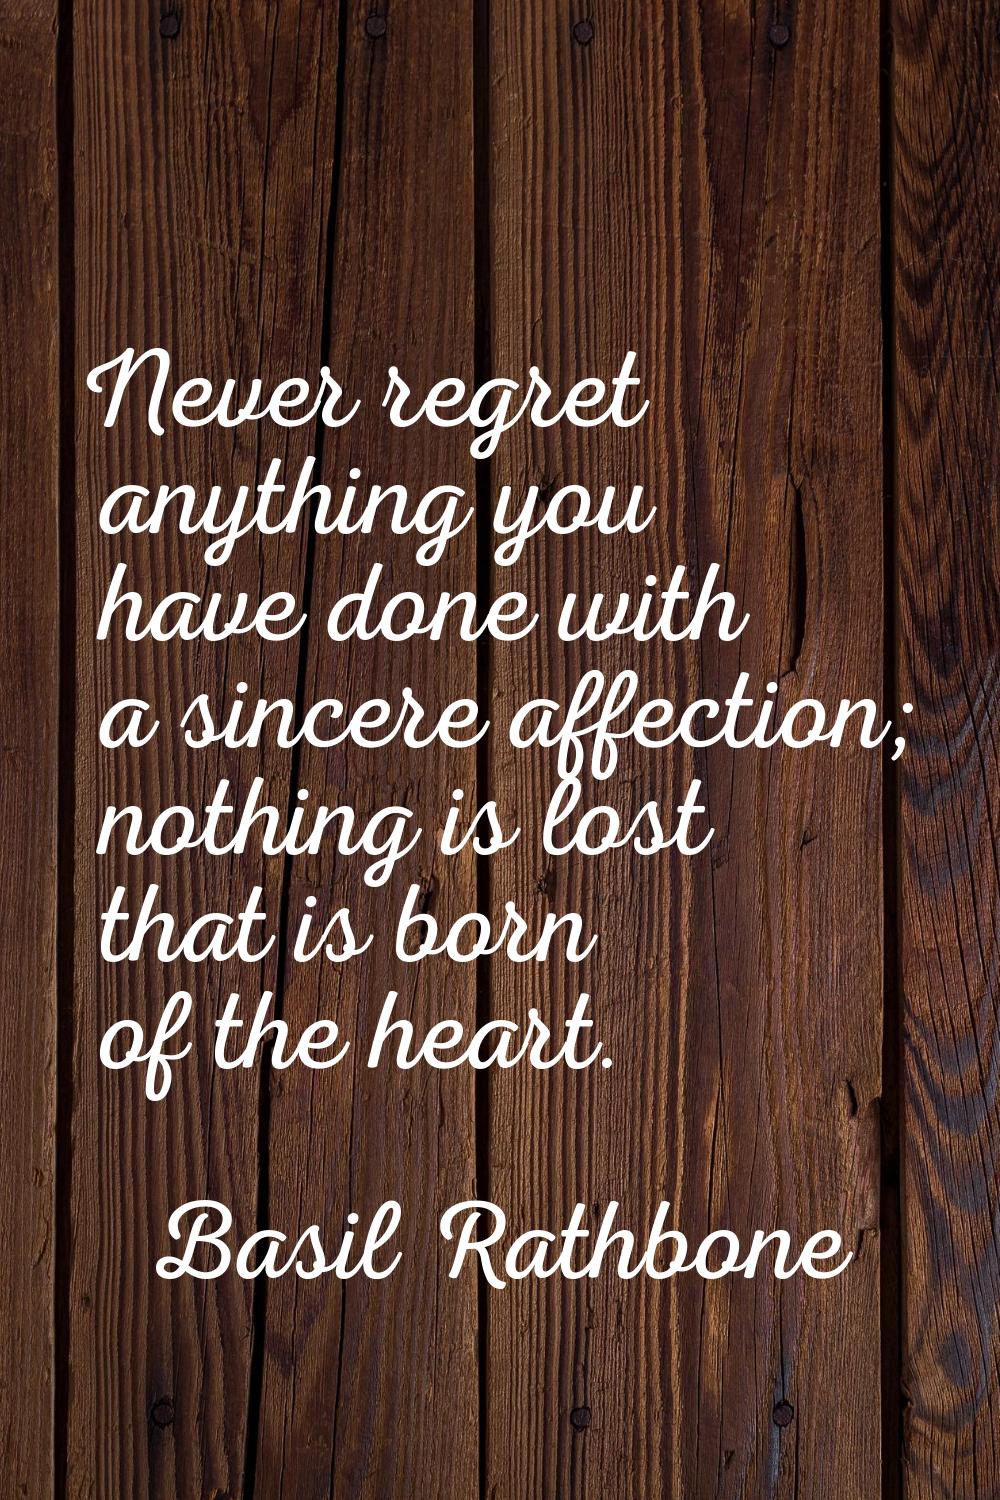 Never regret anything you have done with a sincere affection; nothing is lost that is born of the h